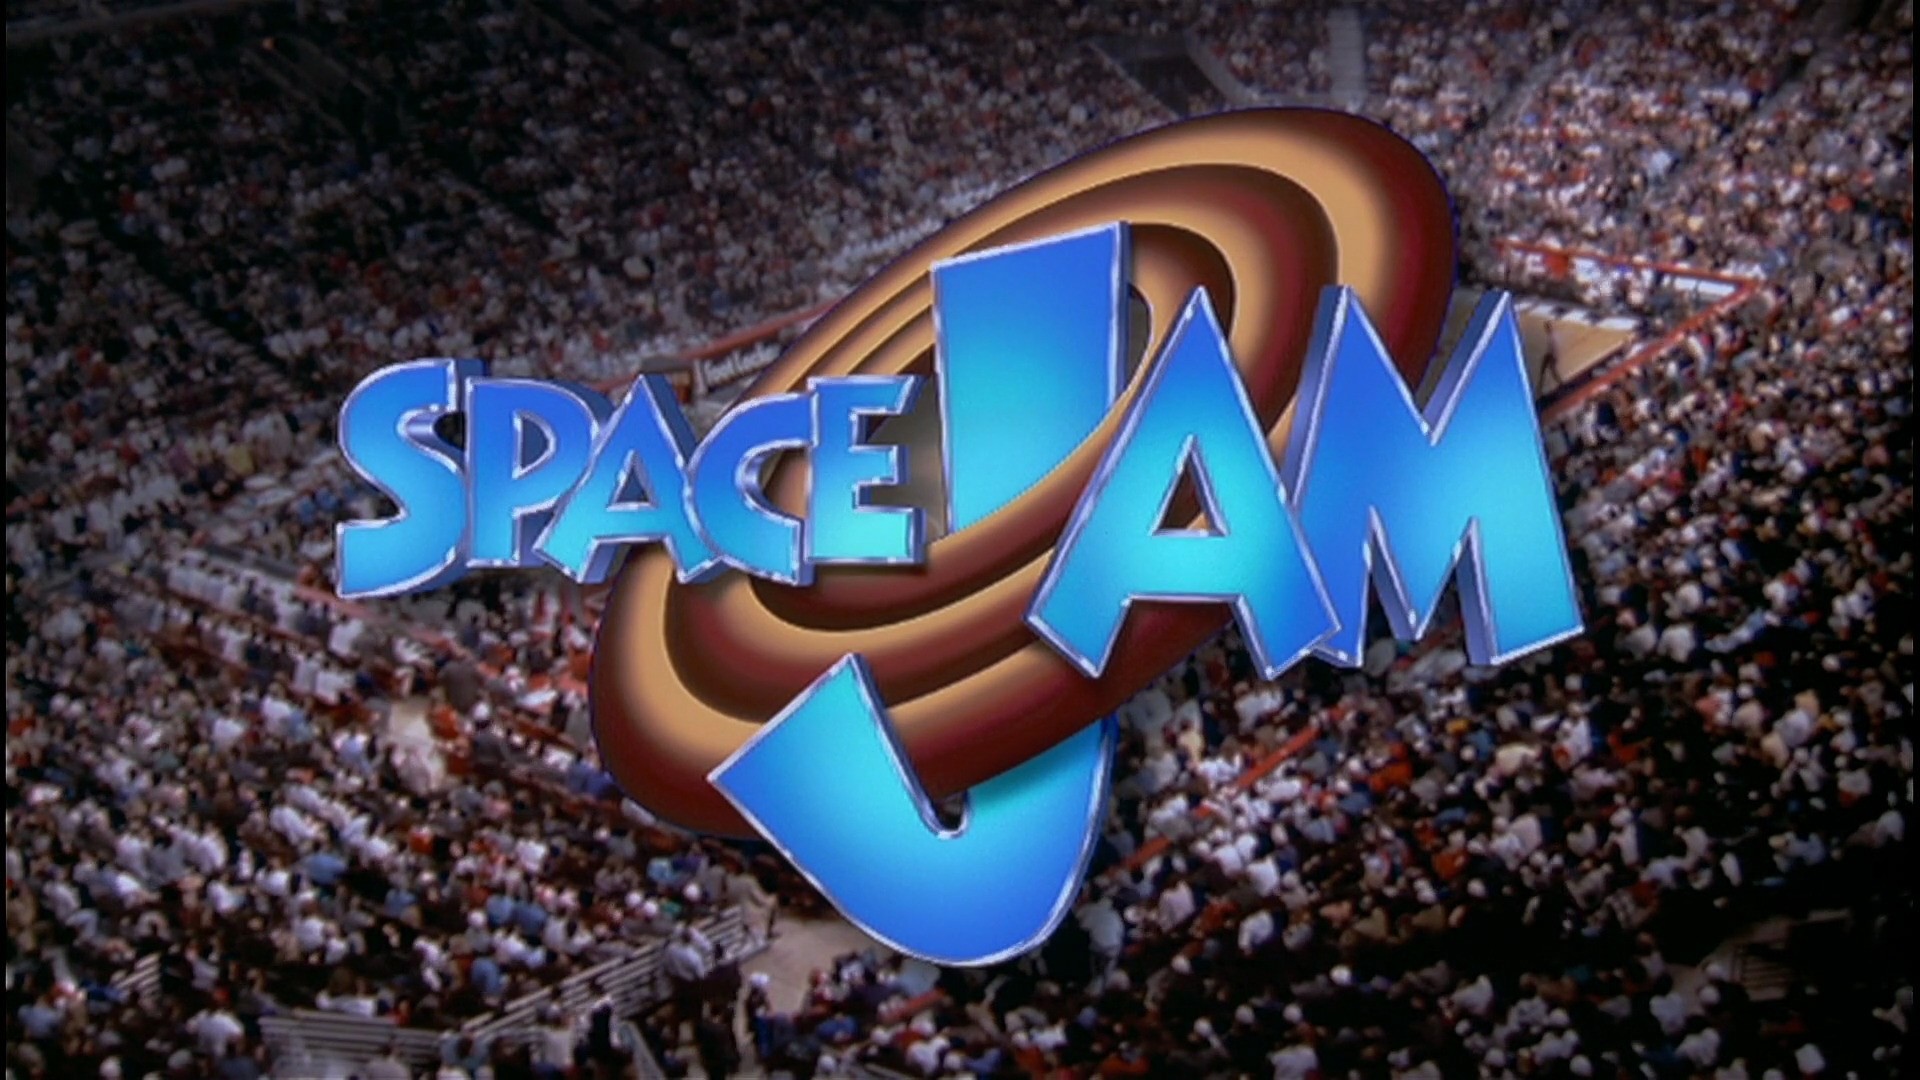 Space Jam A New Legacy Wallpaper by Thekingblader995 on DeviantArt